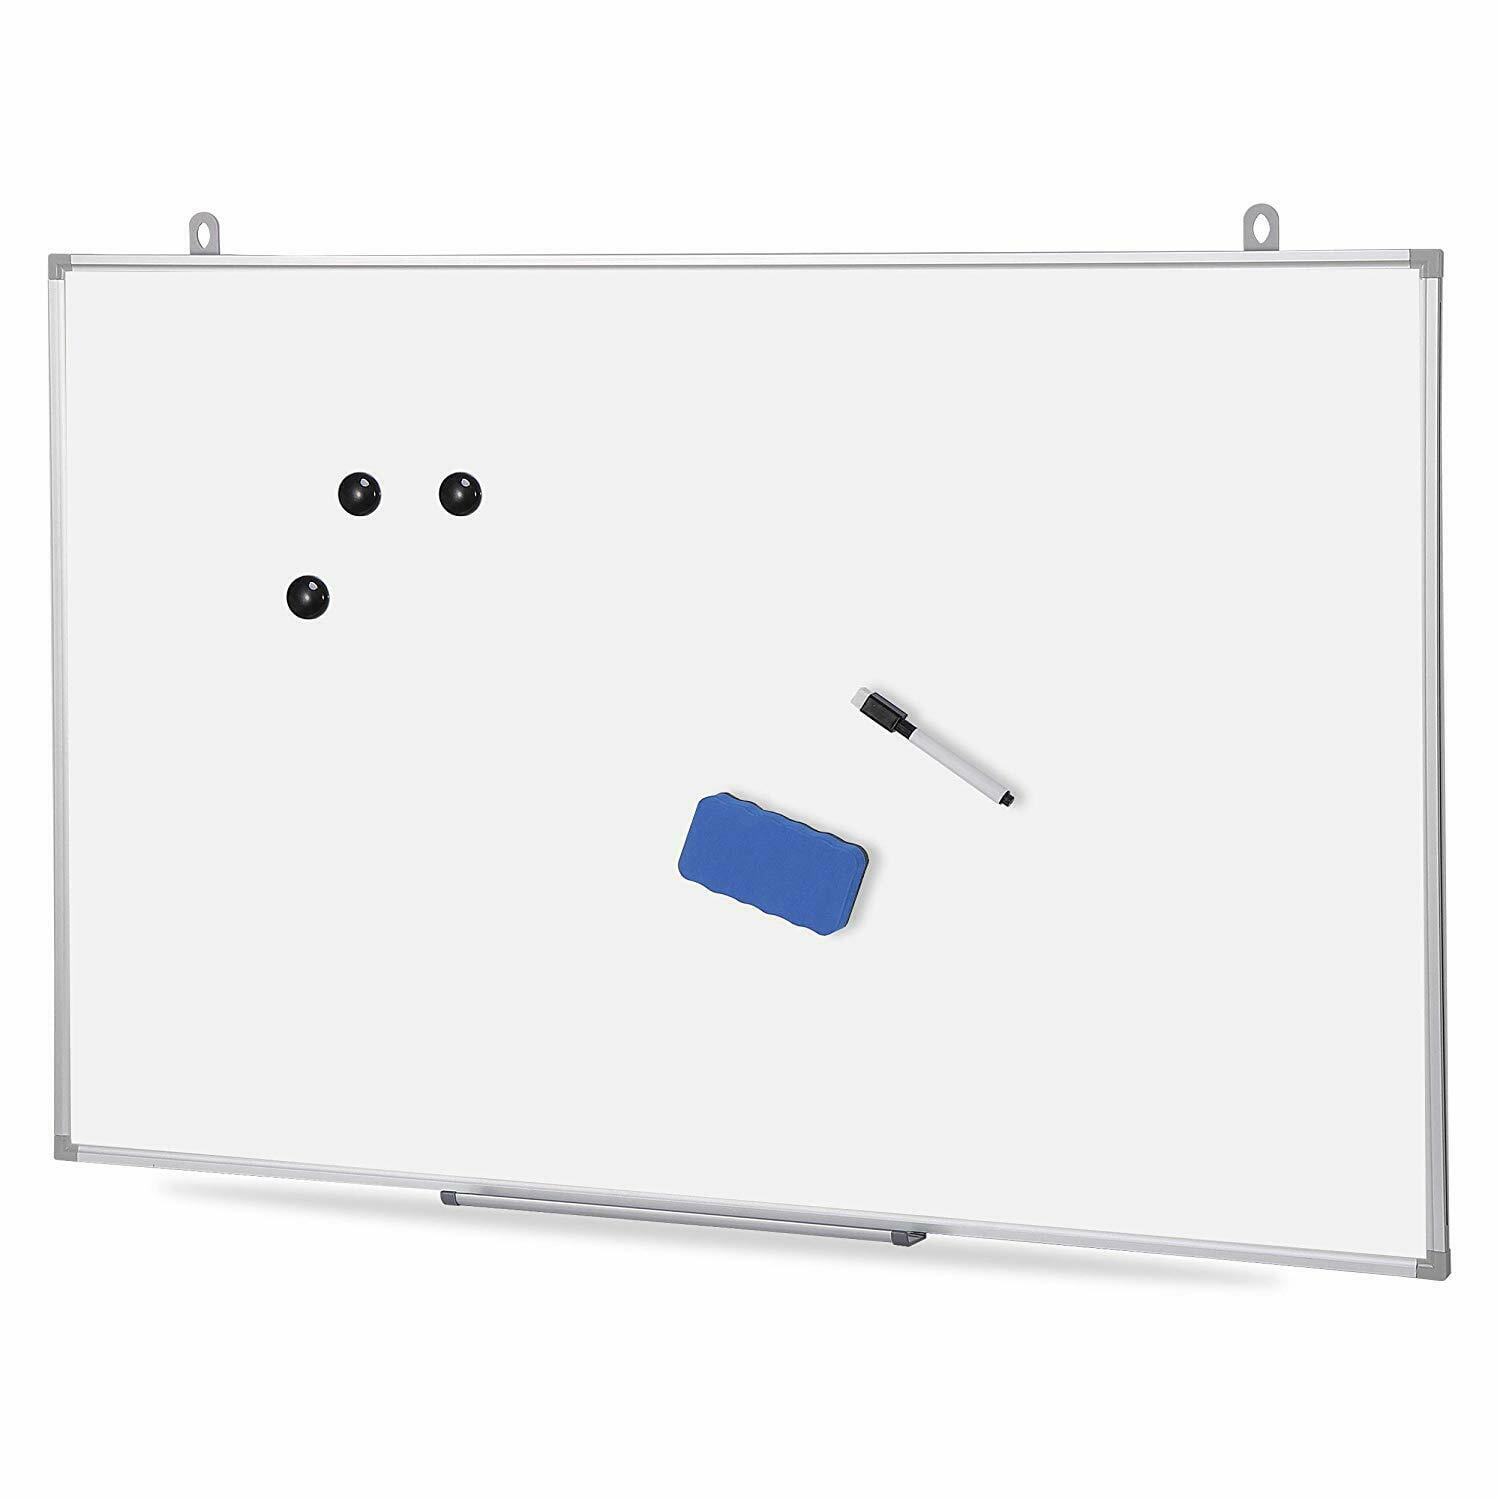 Details about   36 x 24 inch Dry Erase Magnetic Whiteboard White Board Wall Hanging Board 